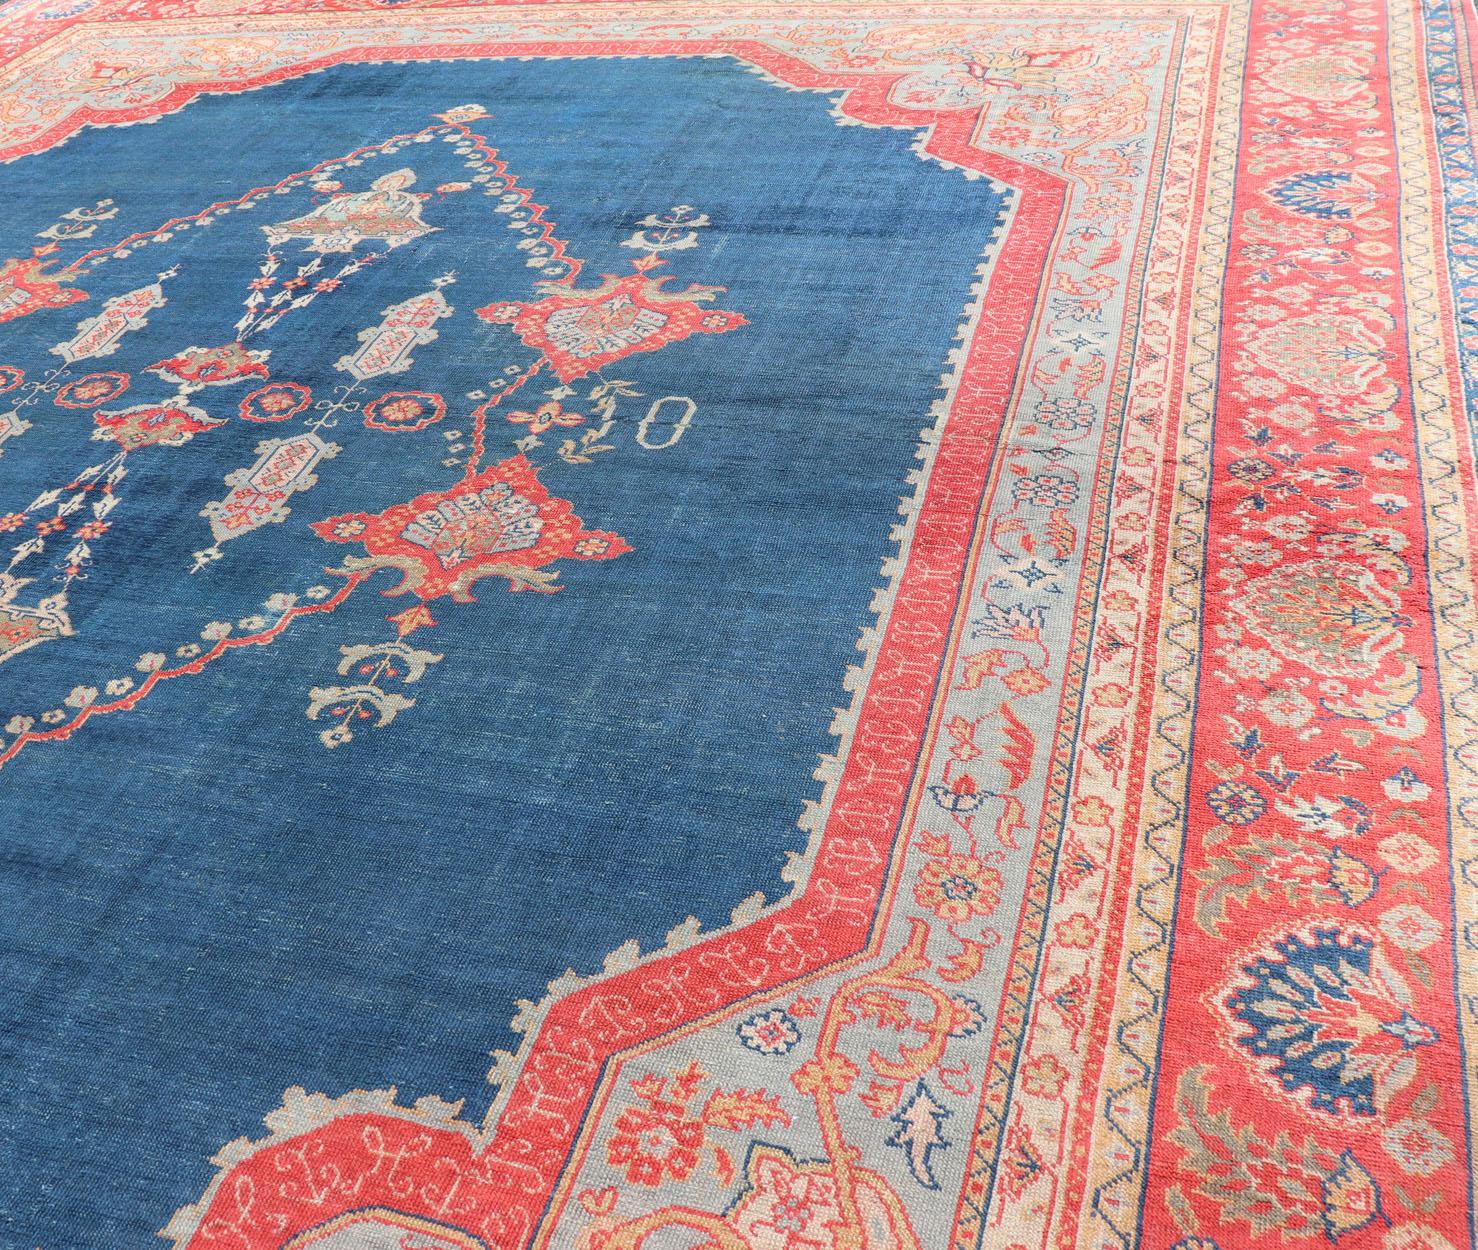 Large Antique Turkish Oushak Rug in Blue and Red with Ornate Medallion Design For Sale 1